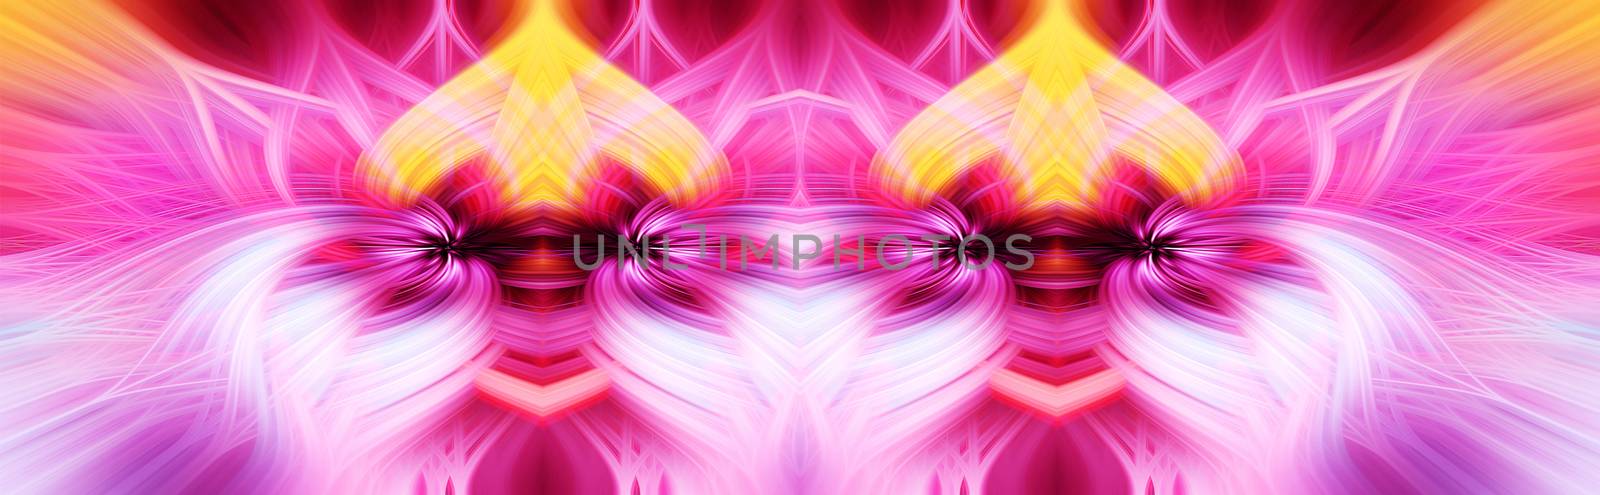 Beautiful abstract intertwined 3d fibers forming a shape of sparkle, flame, flower, interlinked hearts. Pink, maroon, orange, and purple colors. Illustration. Banner and panorama size